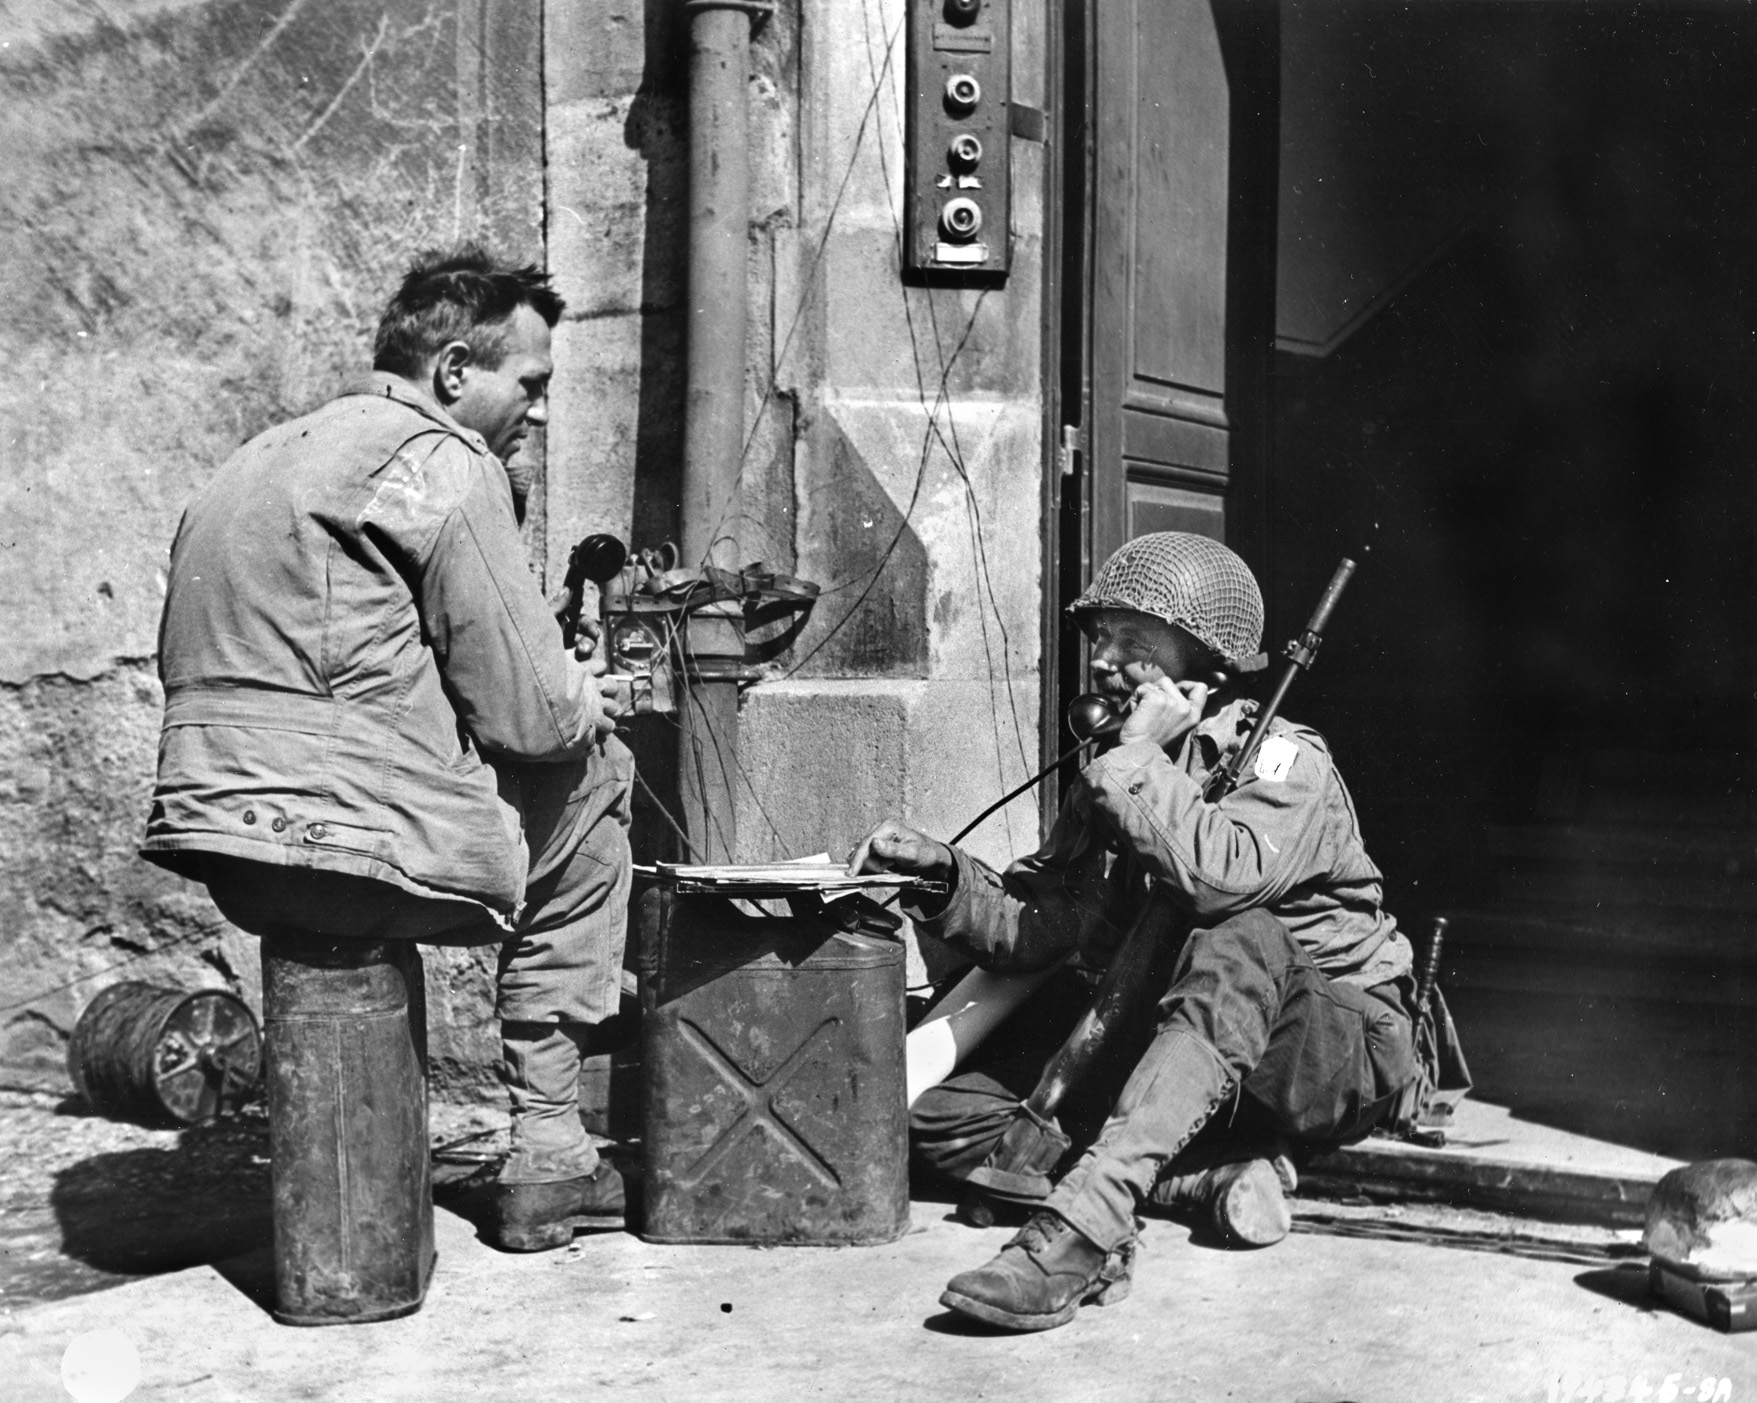 Situated in a doorway somewhere in France, a soldier operates mobile communications gear so that an officer can coordinate mortar fire during offensive operations. As a qualified lineman, Frank Fauver estimates he laid thousands of miles of communication wire for the Army.